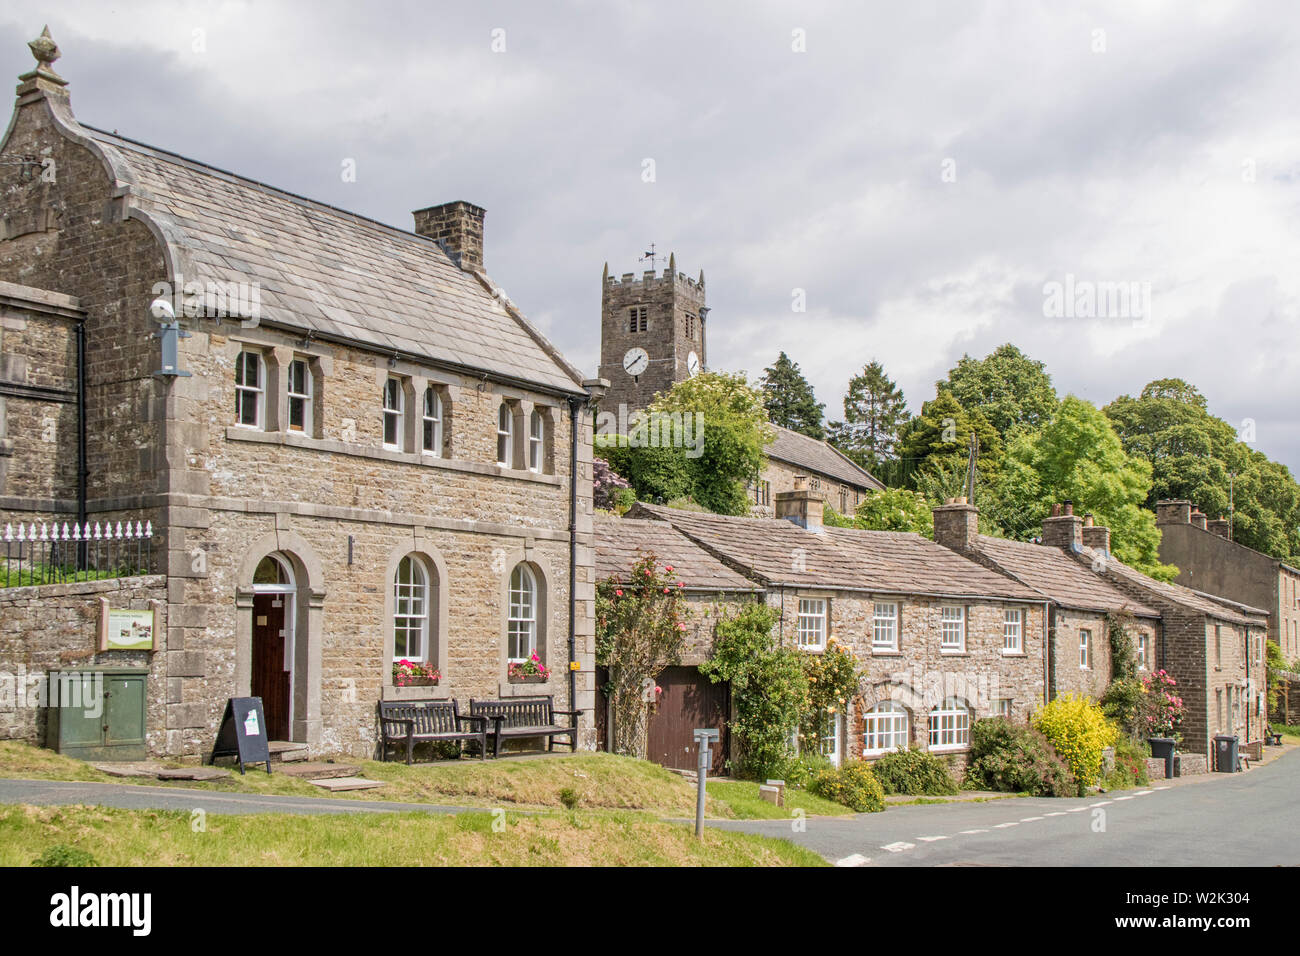 The attractive village of Muker, Swaledale, Yorkshire Dales National Park, North Yorkshire, England Stock Photo